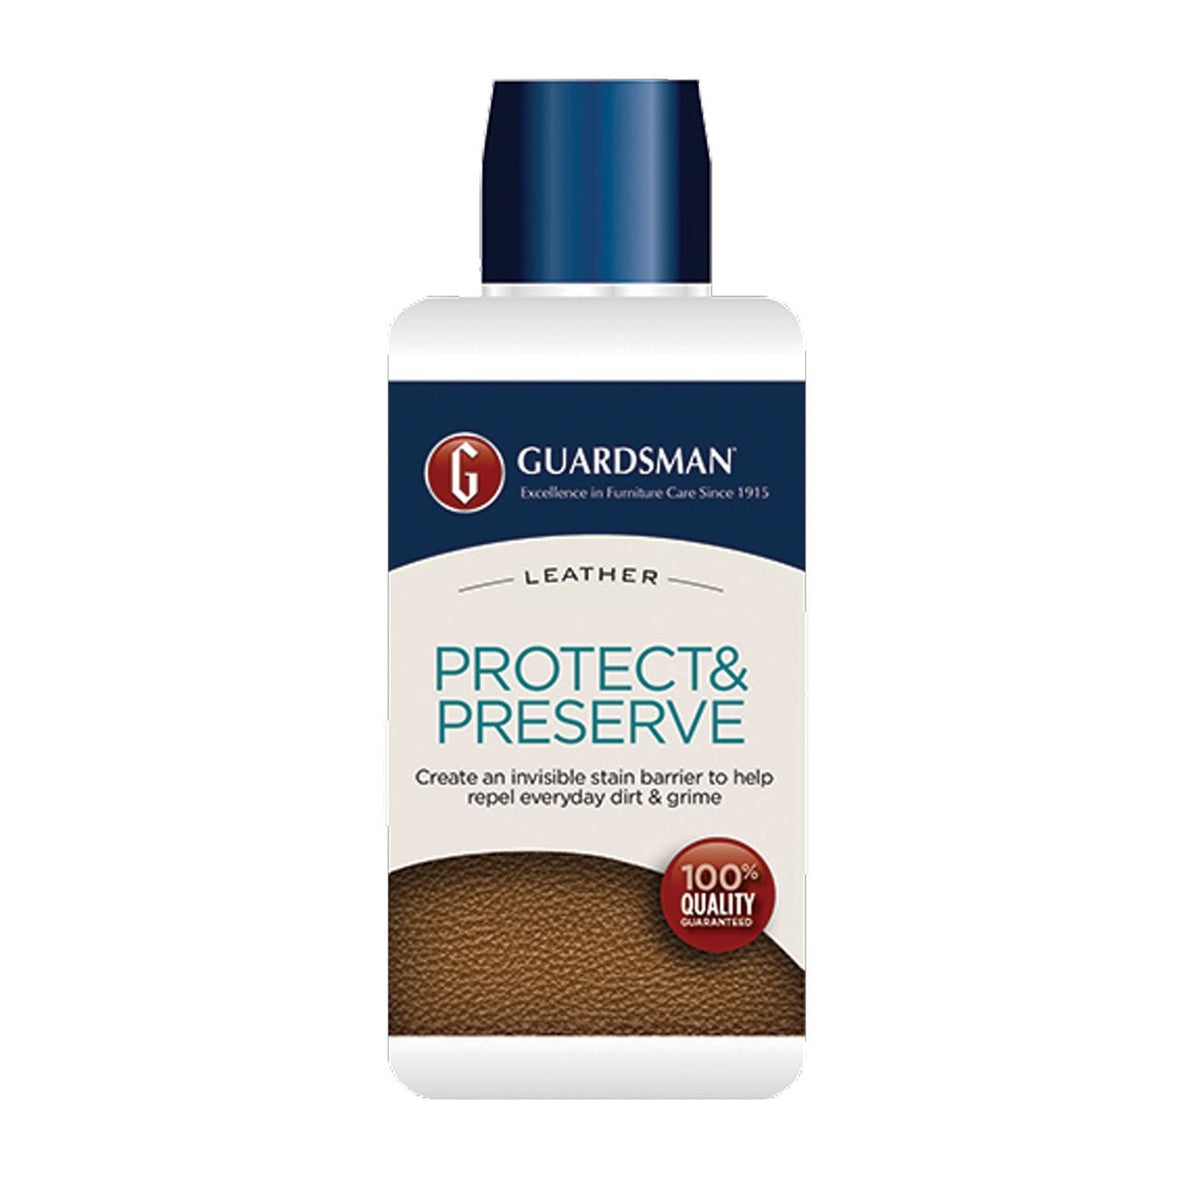 Guardsman Leather Protect and Preserve Step 2 Bottle 250ml